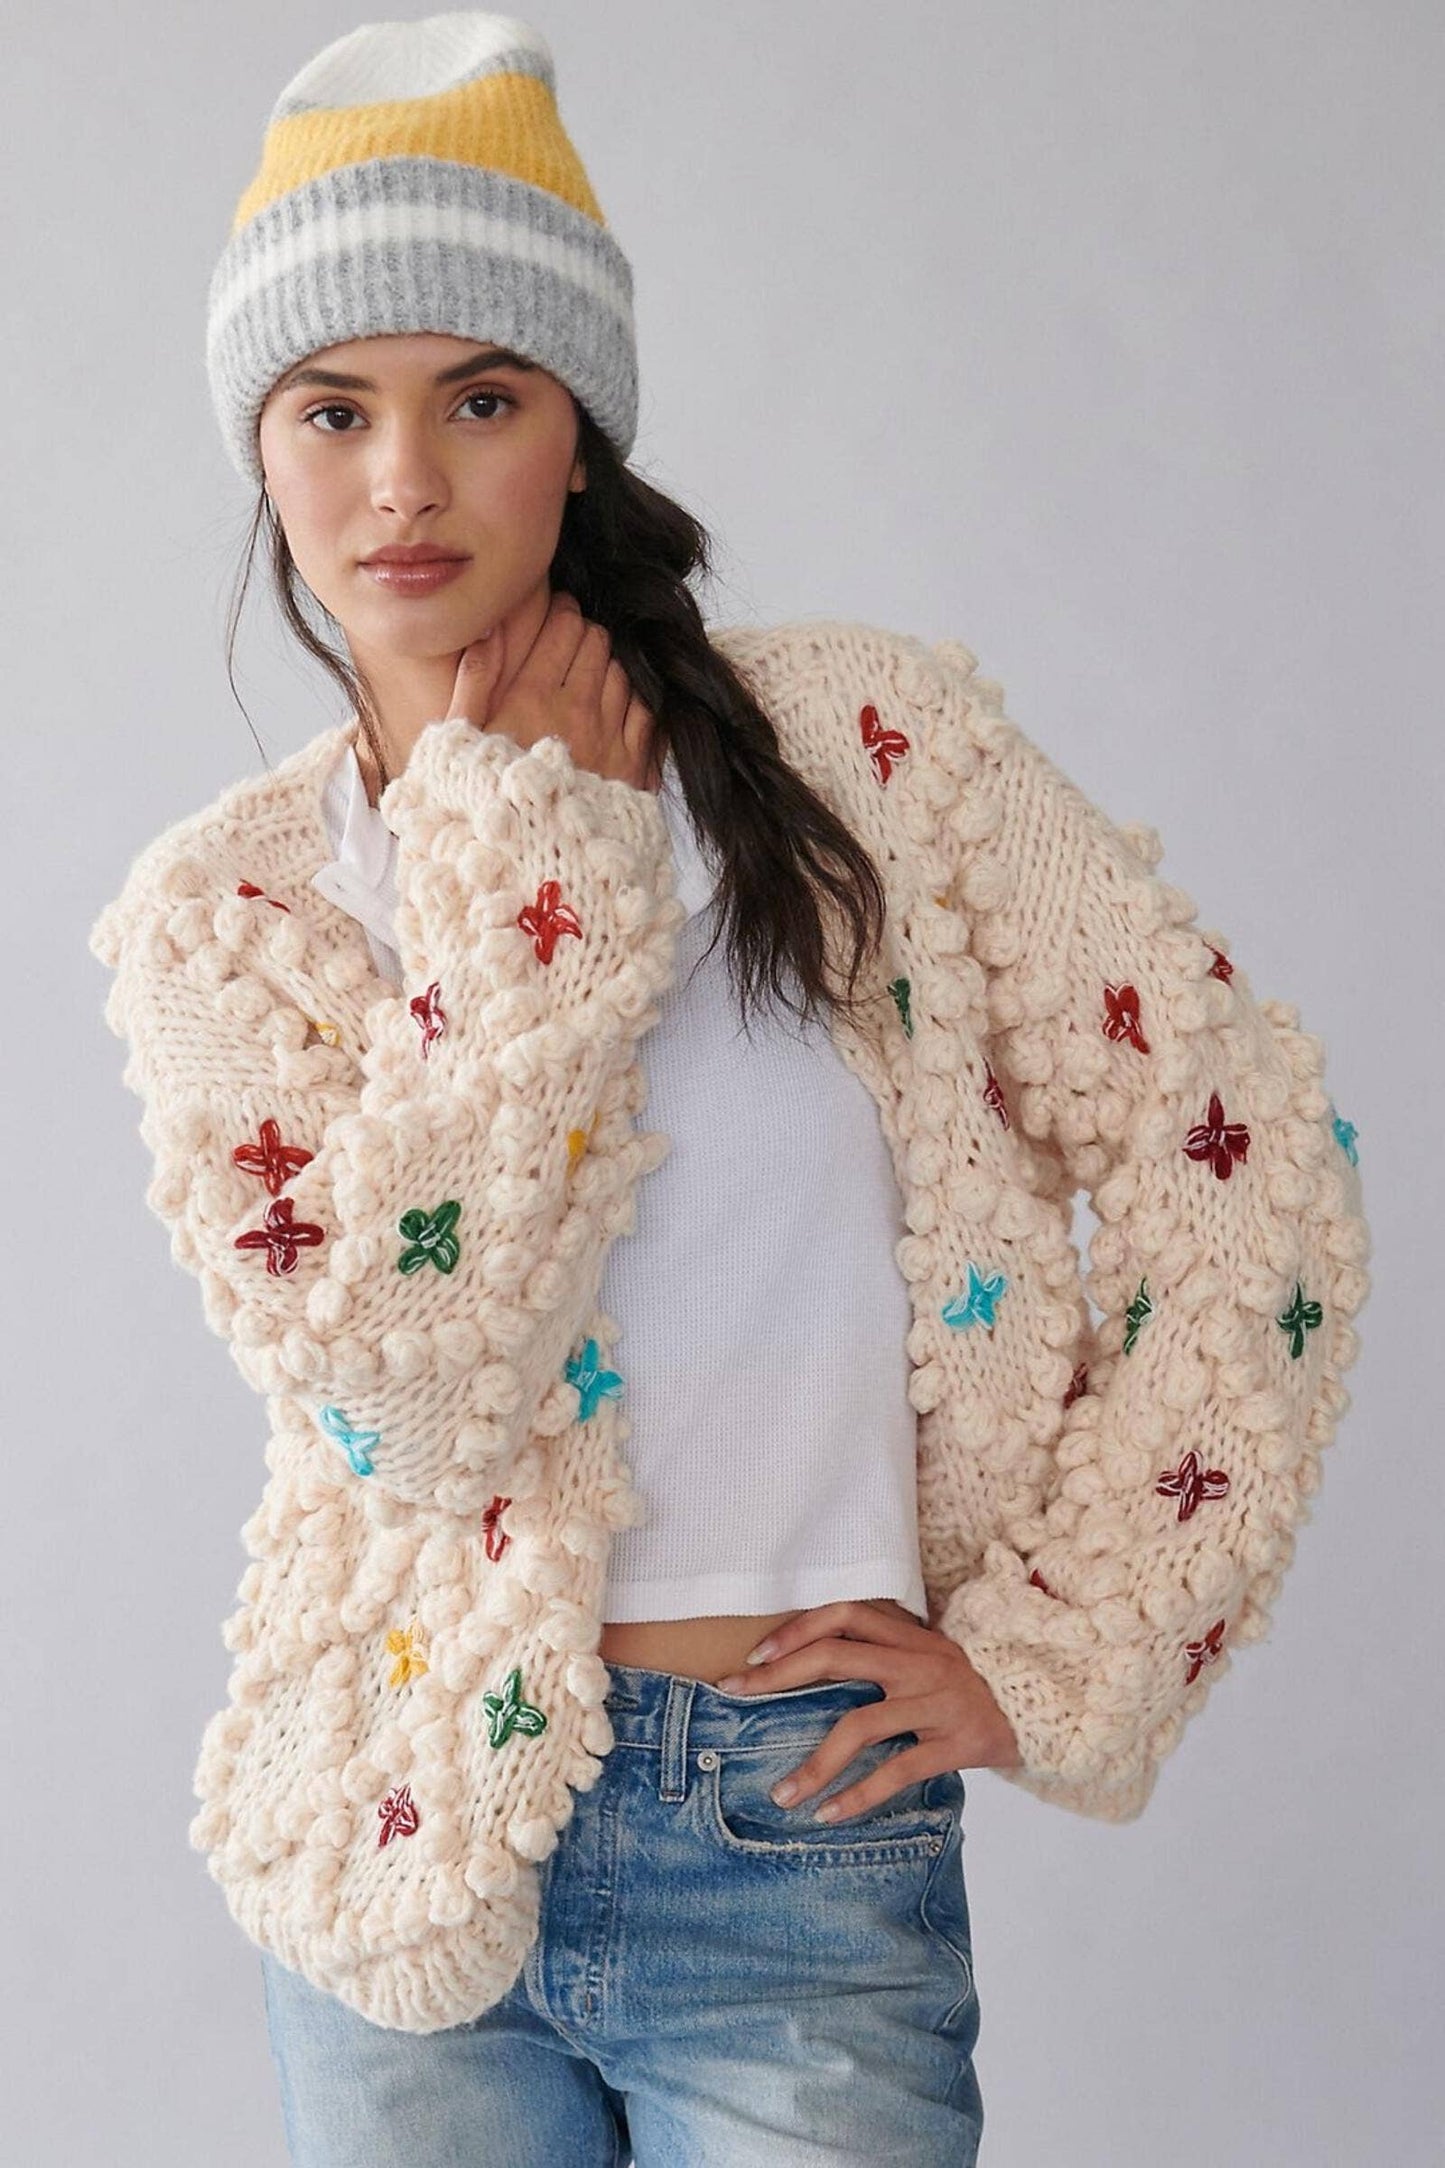 The "Daisy" Ivory Knitted Cardigan